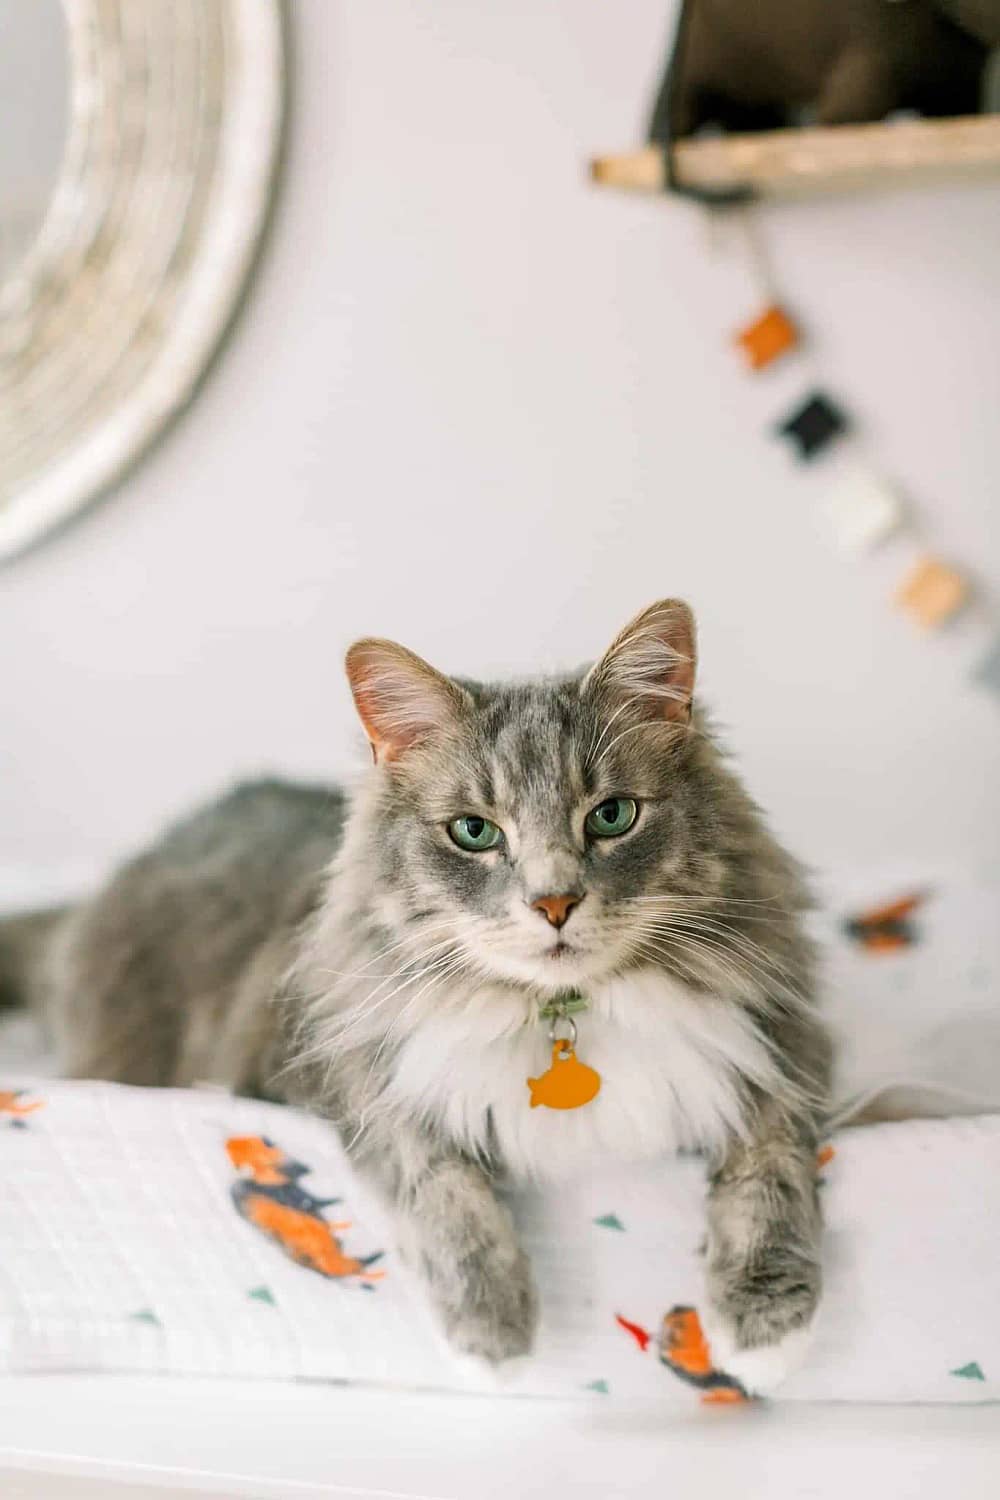 Long haired Gray tabby cat with green eyes sitting on Bison changing pad